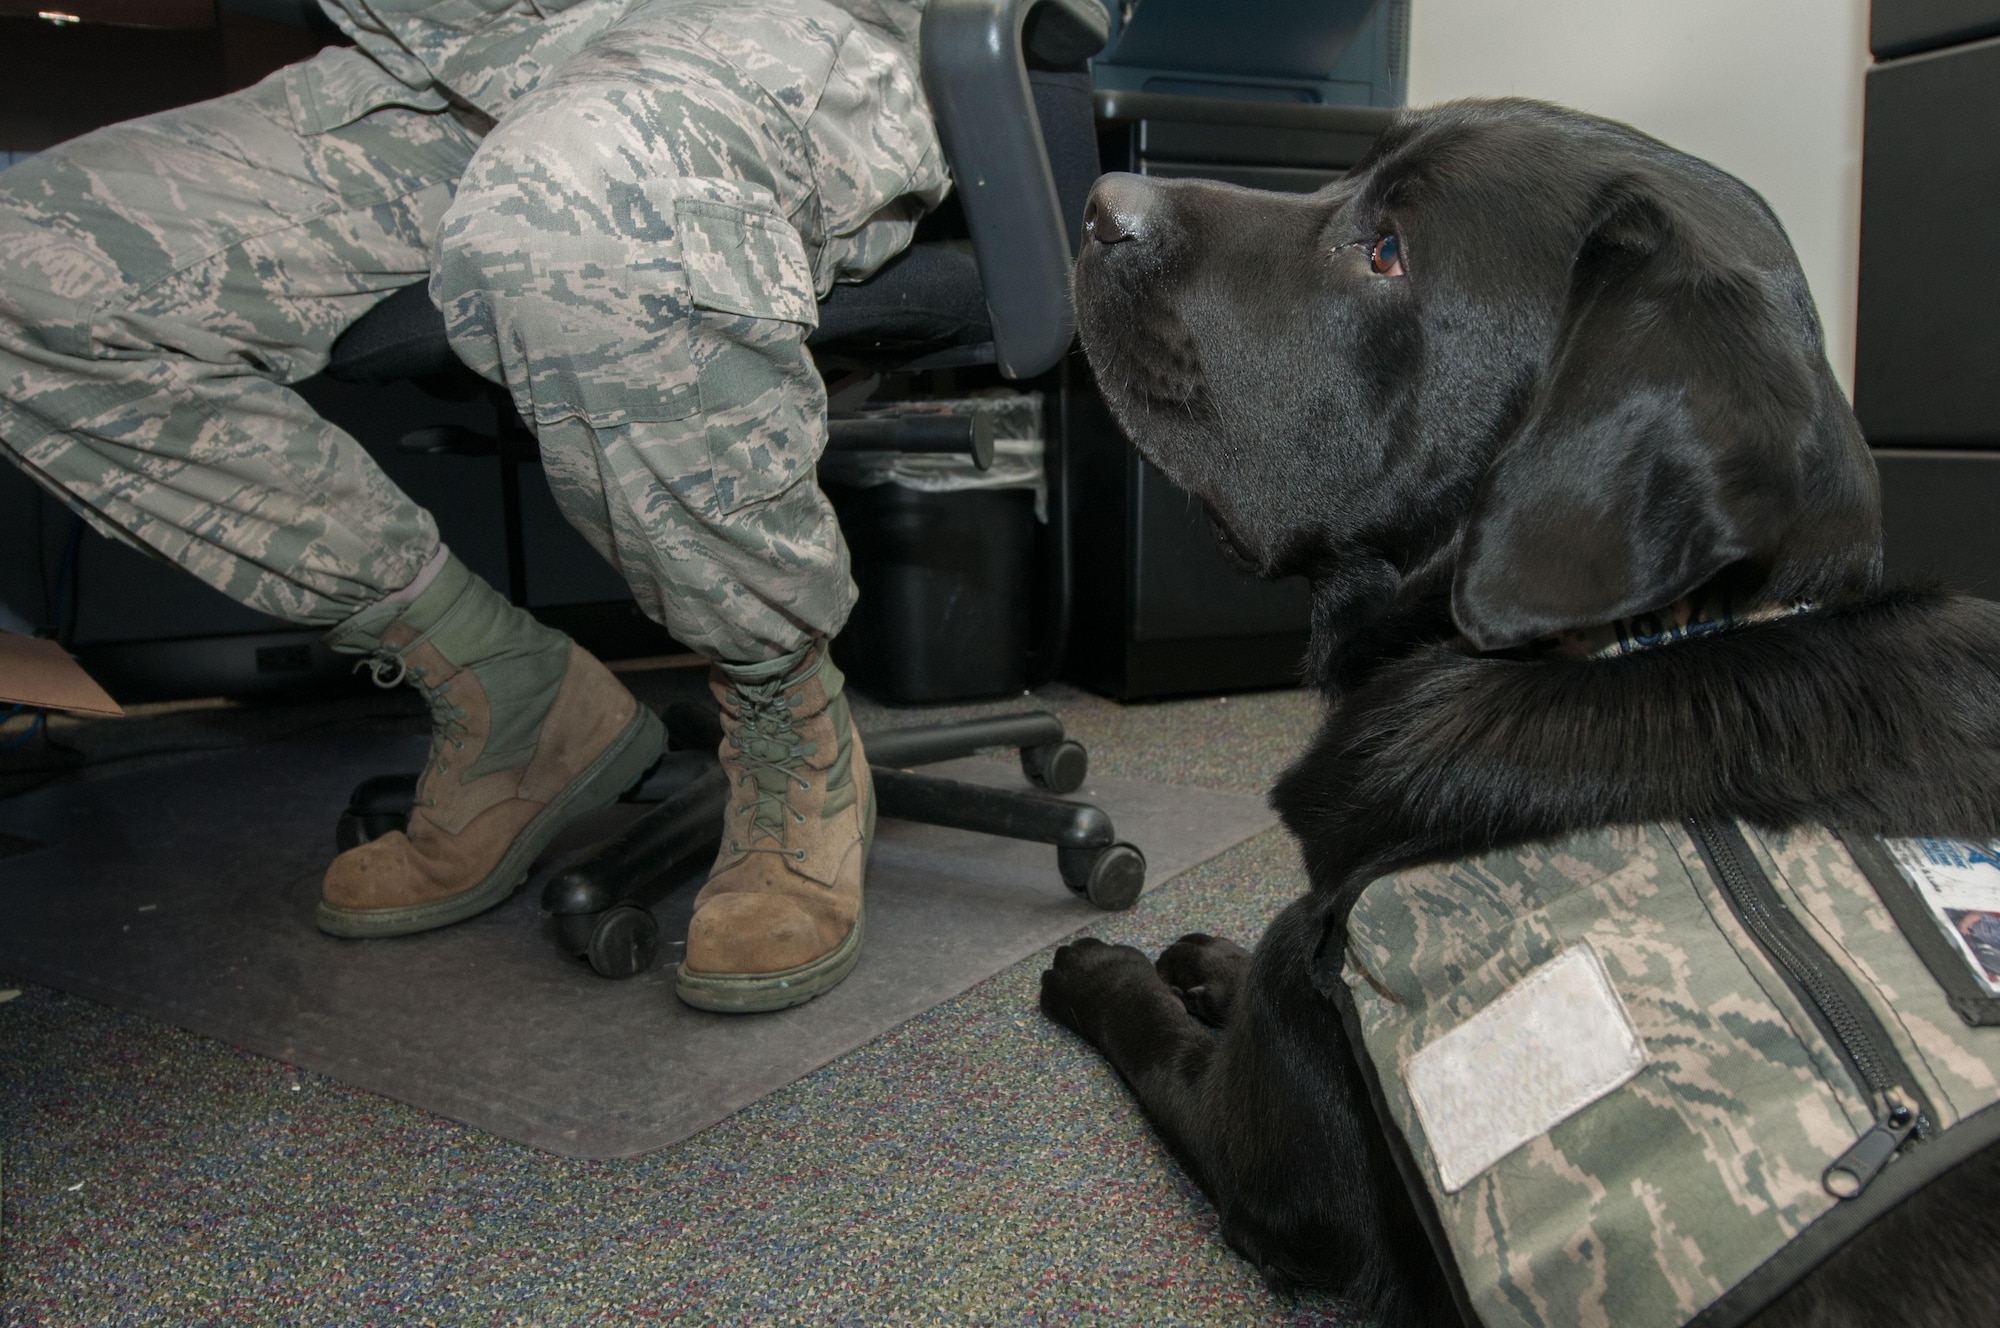 Luke, a service dog, lies at the feet of Staff Sgt. Ryan Garrison as he completes work at the Defense Courier Station-Baltimore on Fort Meade, Md., March 29, 2016. Luke goes everywhere with Garrison to assist in the Airman’s recovery from a combat-related injury. (U.S. Air Force photo/Sean Kimmons)